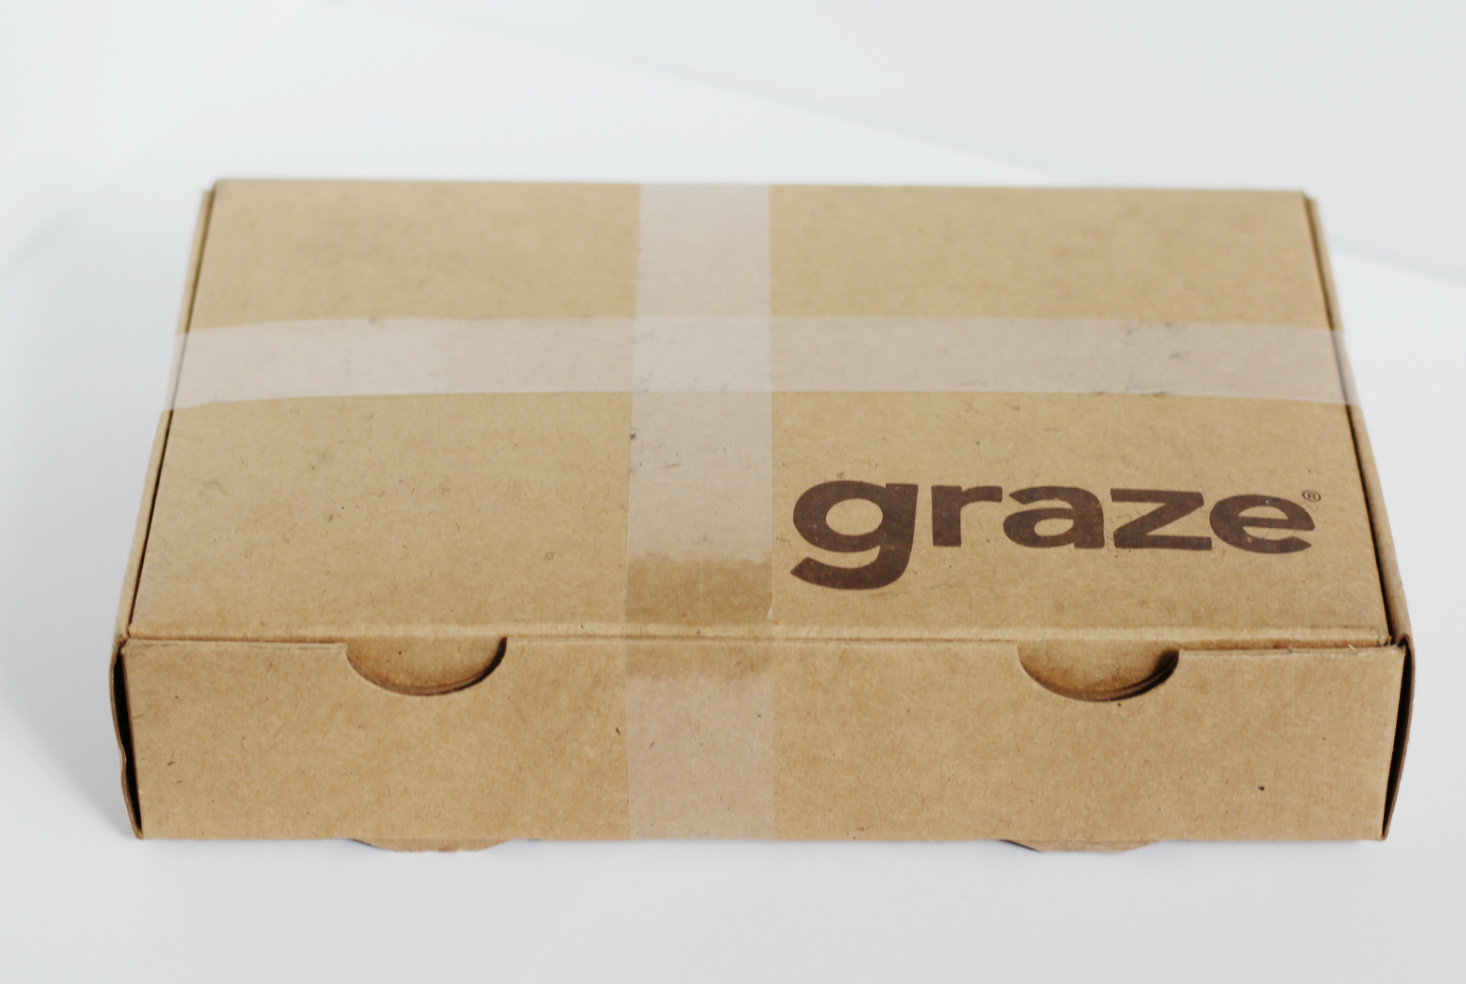 Graze 8 Snack Variety Box Review #2 + Free Box Coupon – October 2017